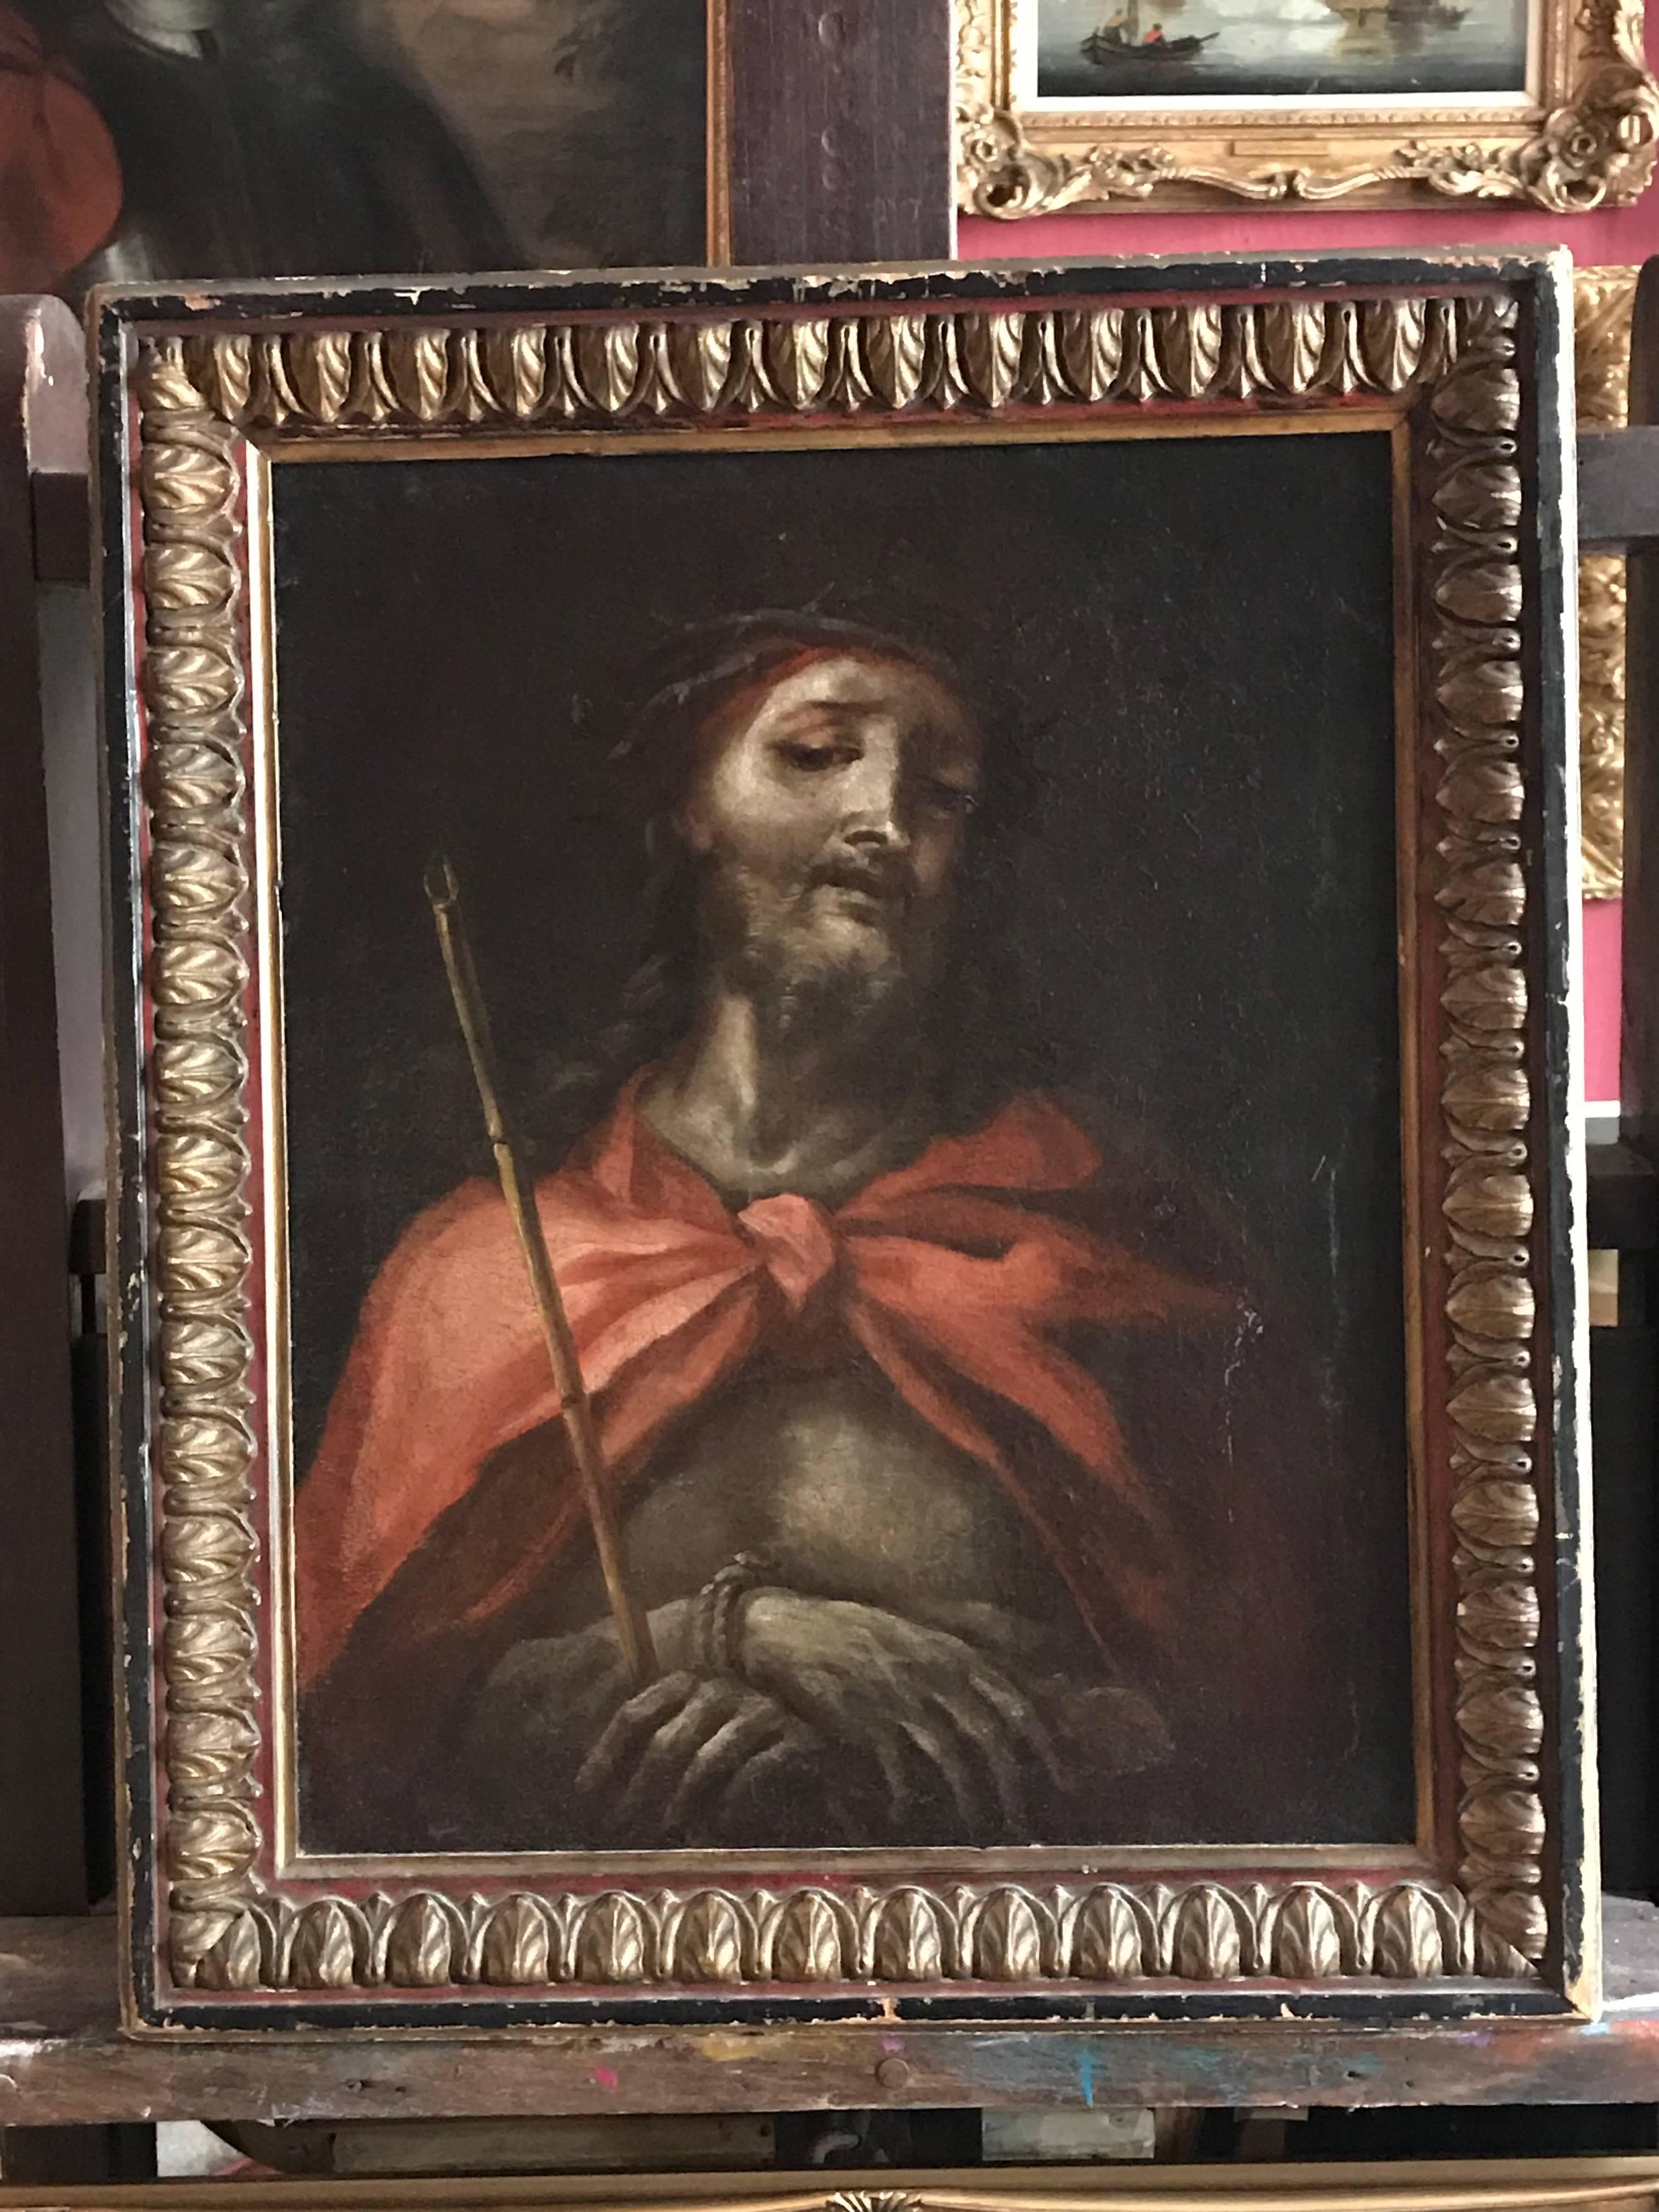 Ecce Homo
North Italian School, circa 1600
oil painting on canvas, framed
canvas: 18.5 x 14.5 inches
framed: 21.75 x 18 inches

Provenance: formerly with Christies Auctioneers

Very fine quality Italian Old Master oil painting on canvas, dating to